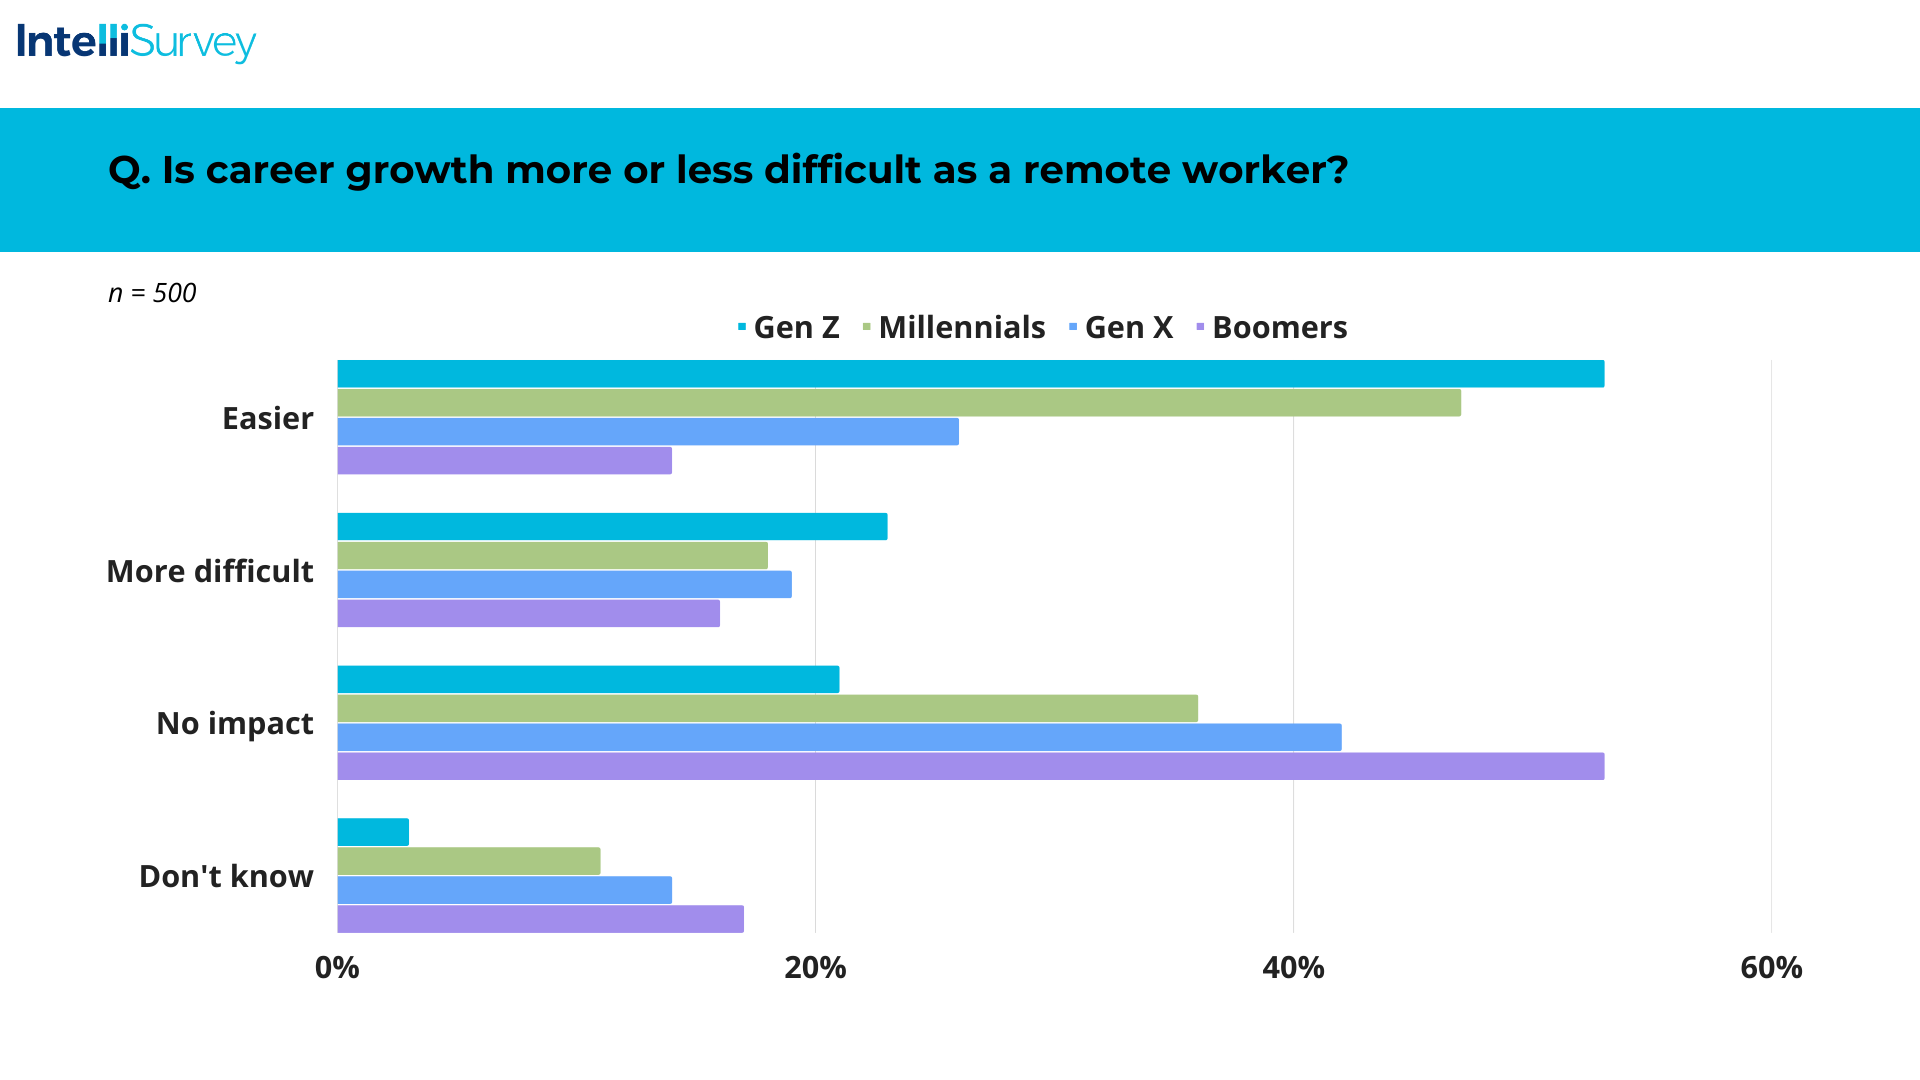 Chart of the difficulty level of career growth as a remote worker